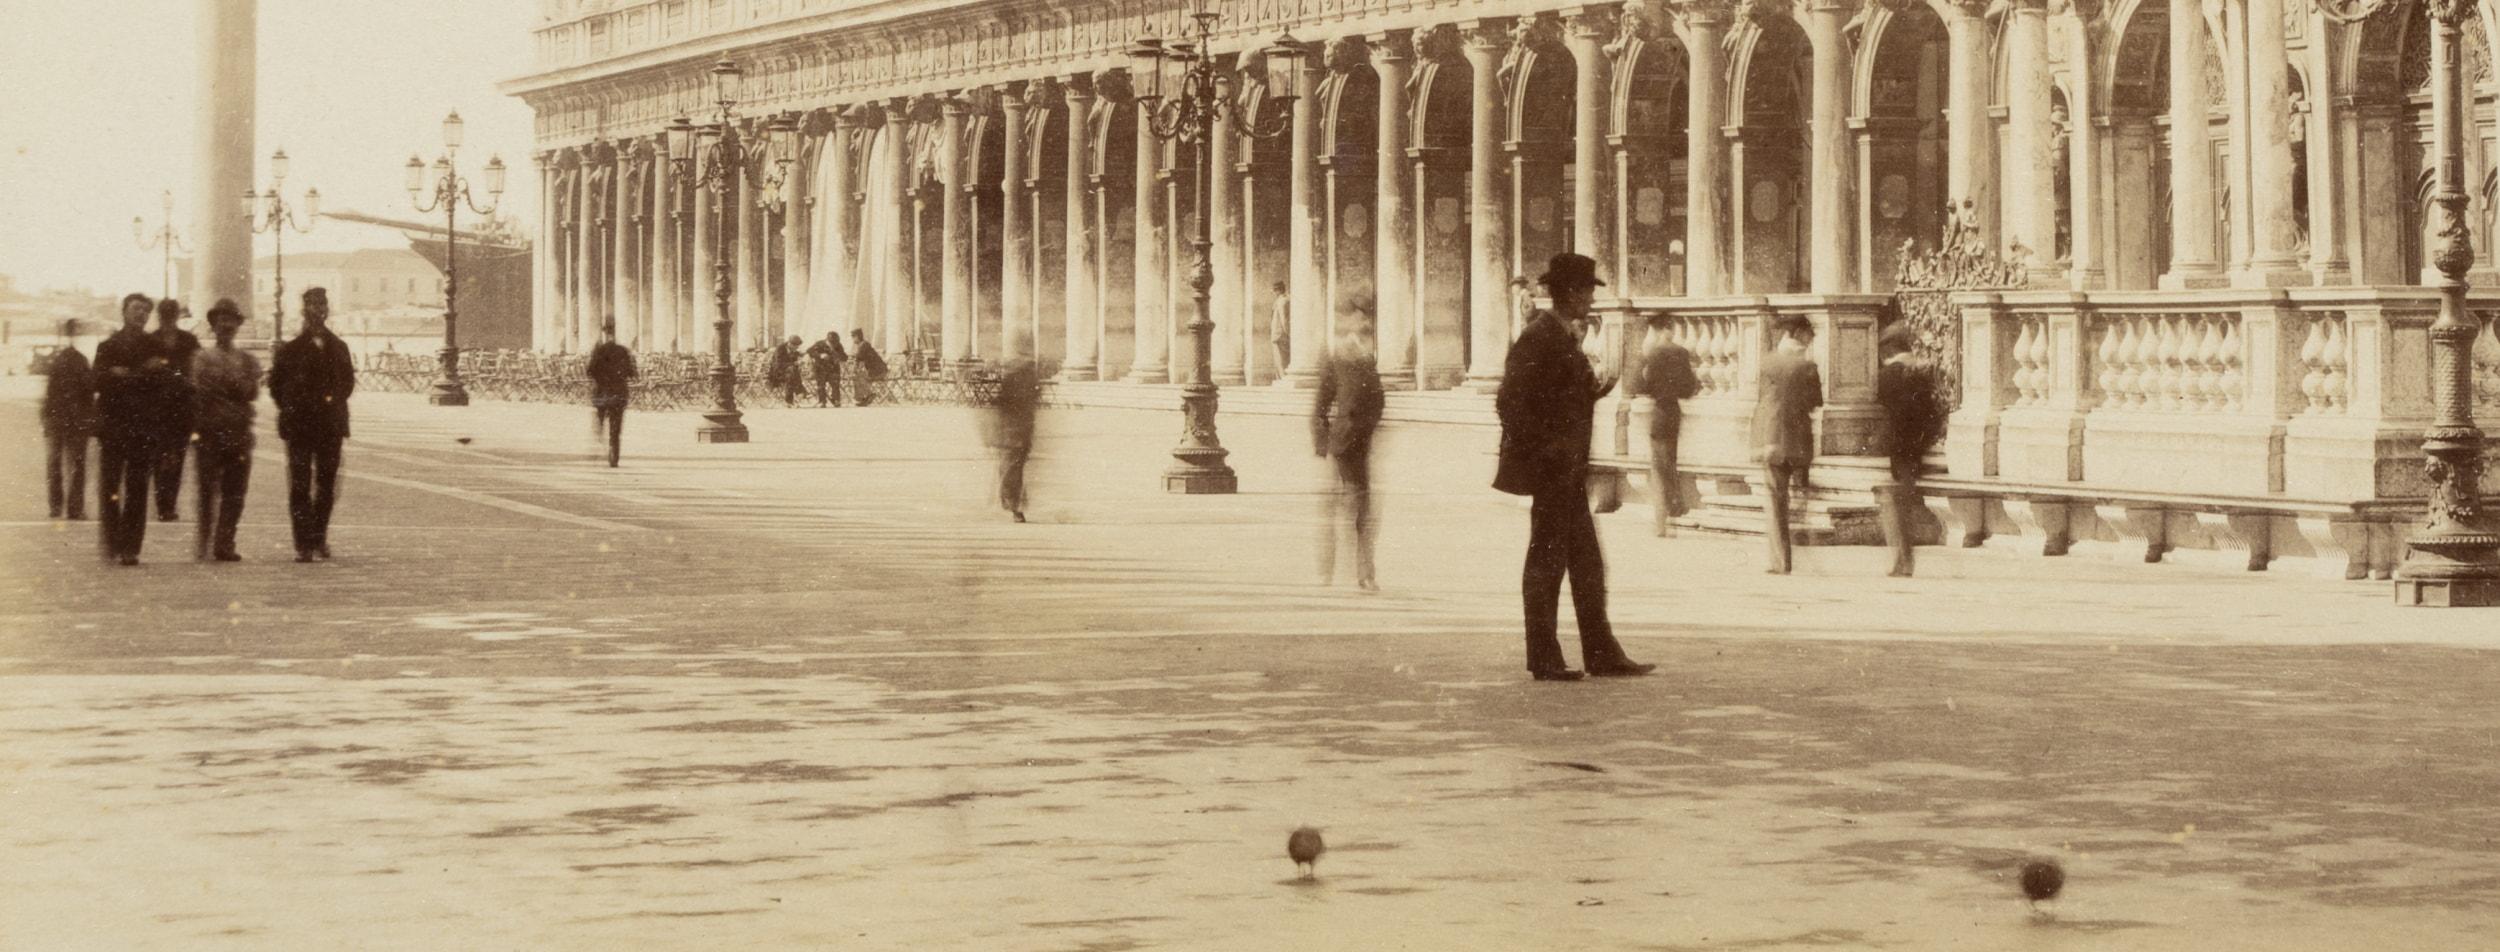 Carlo Naya (1816 Tronzano Vercellese - 1882 Venice) Circle: View from the north across the Piazzetta to the Libreria di San Marco with passers-by, the Campanile with the Loggetta in the foreground on the right, Venice, c. 1880, albumen paper